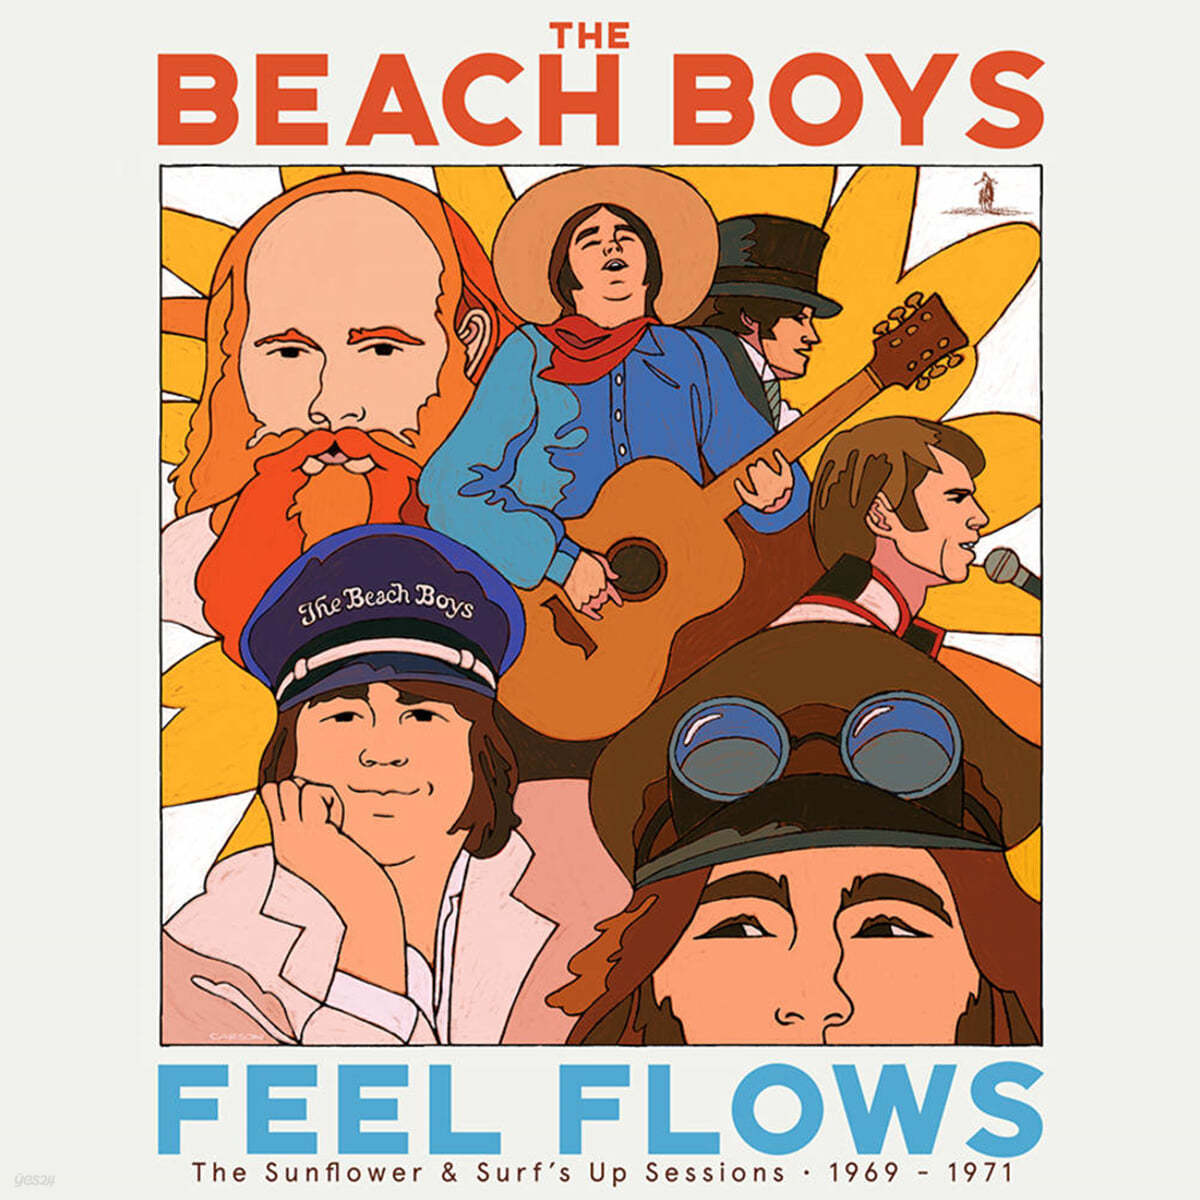 The Beach Boys (비치 보이스) - Feel Flows: The Sunflower & Surf's Up Sessions 1969-1971 